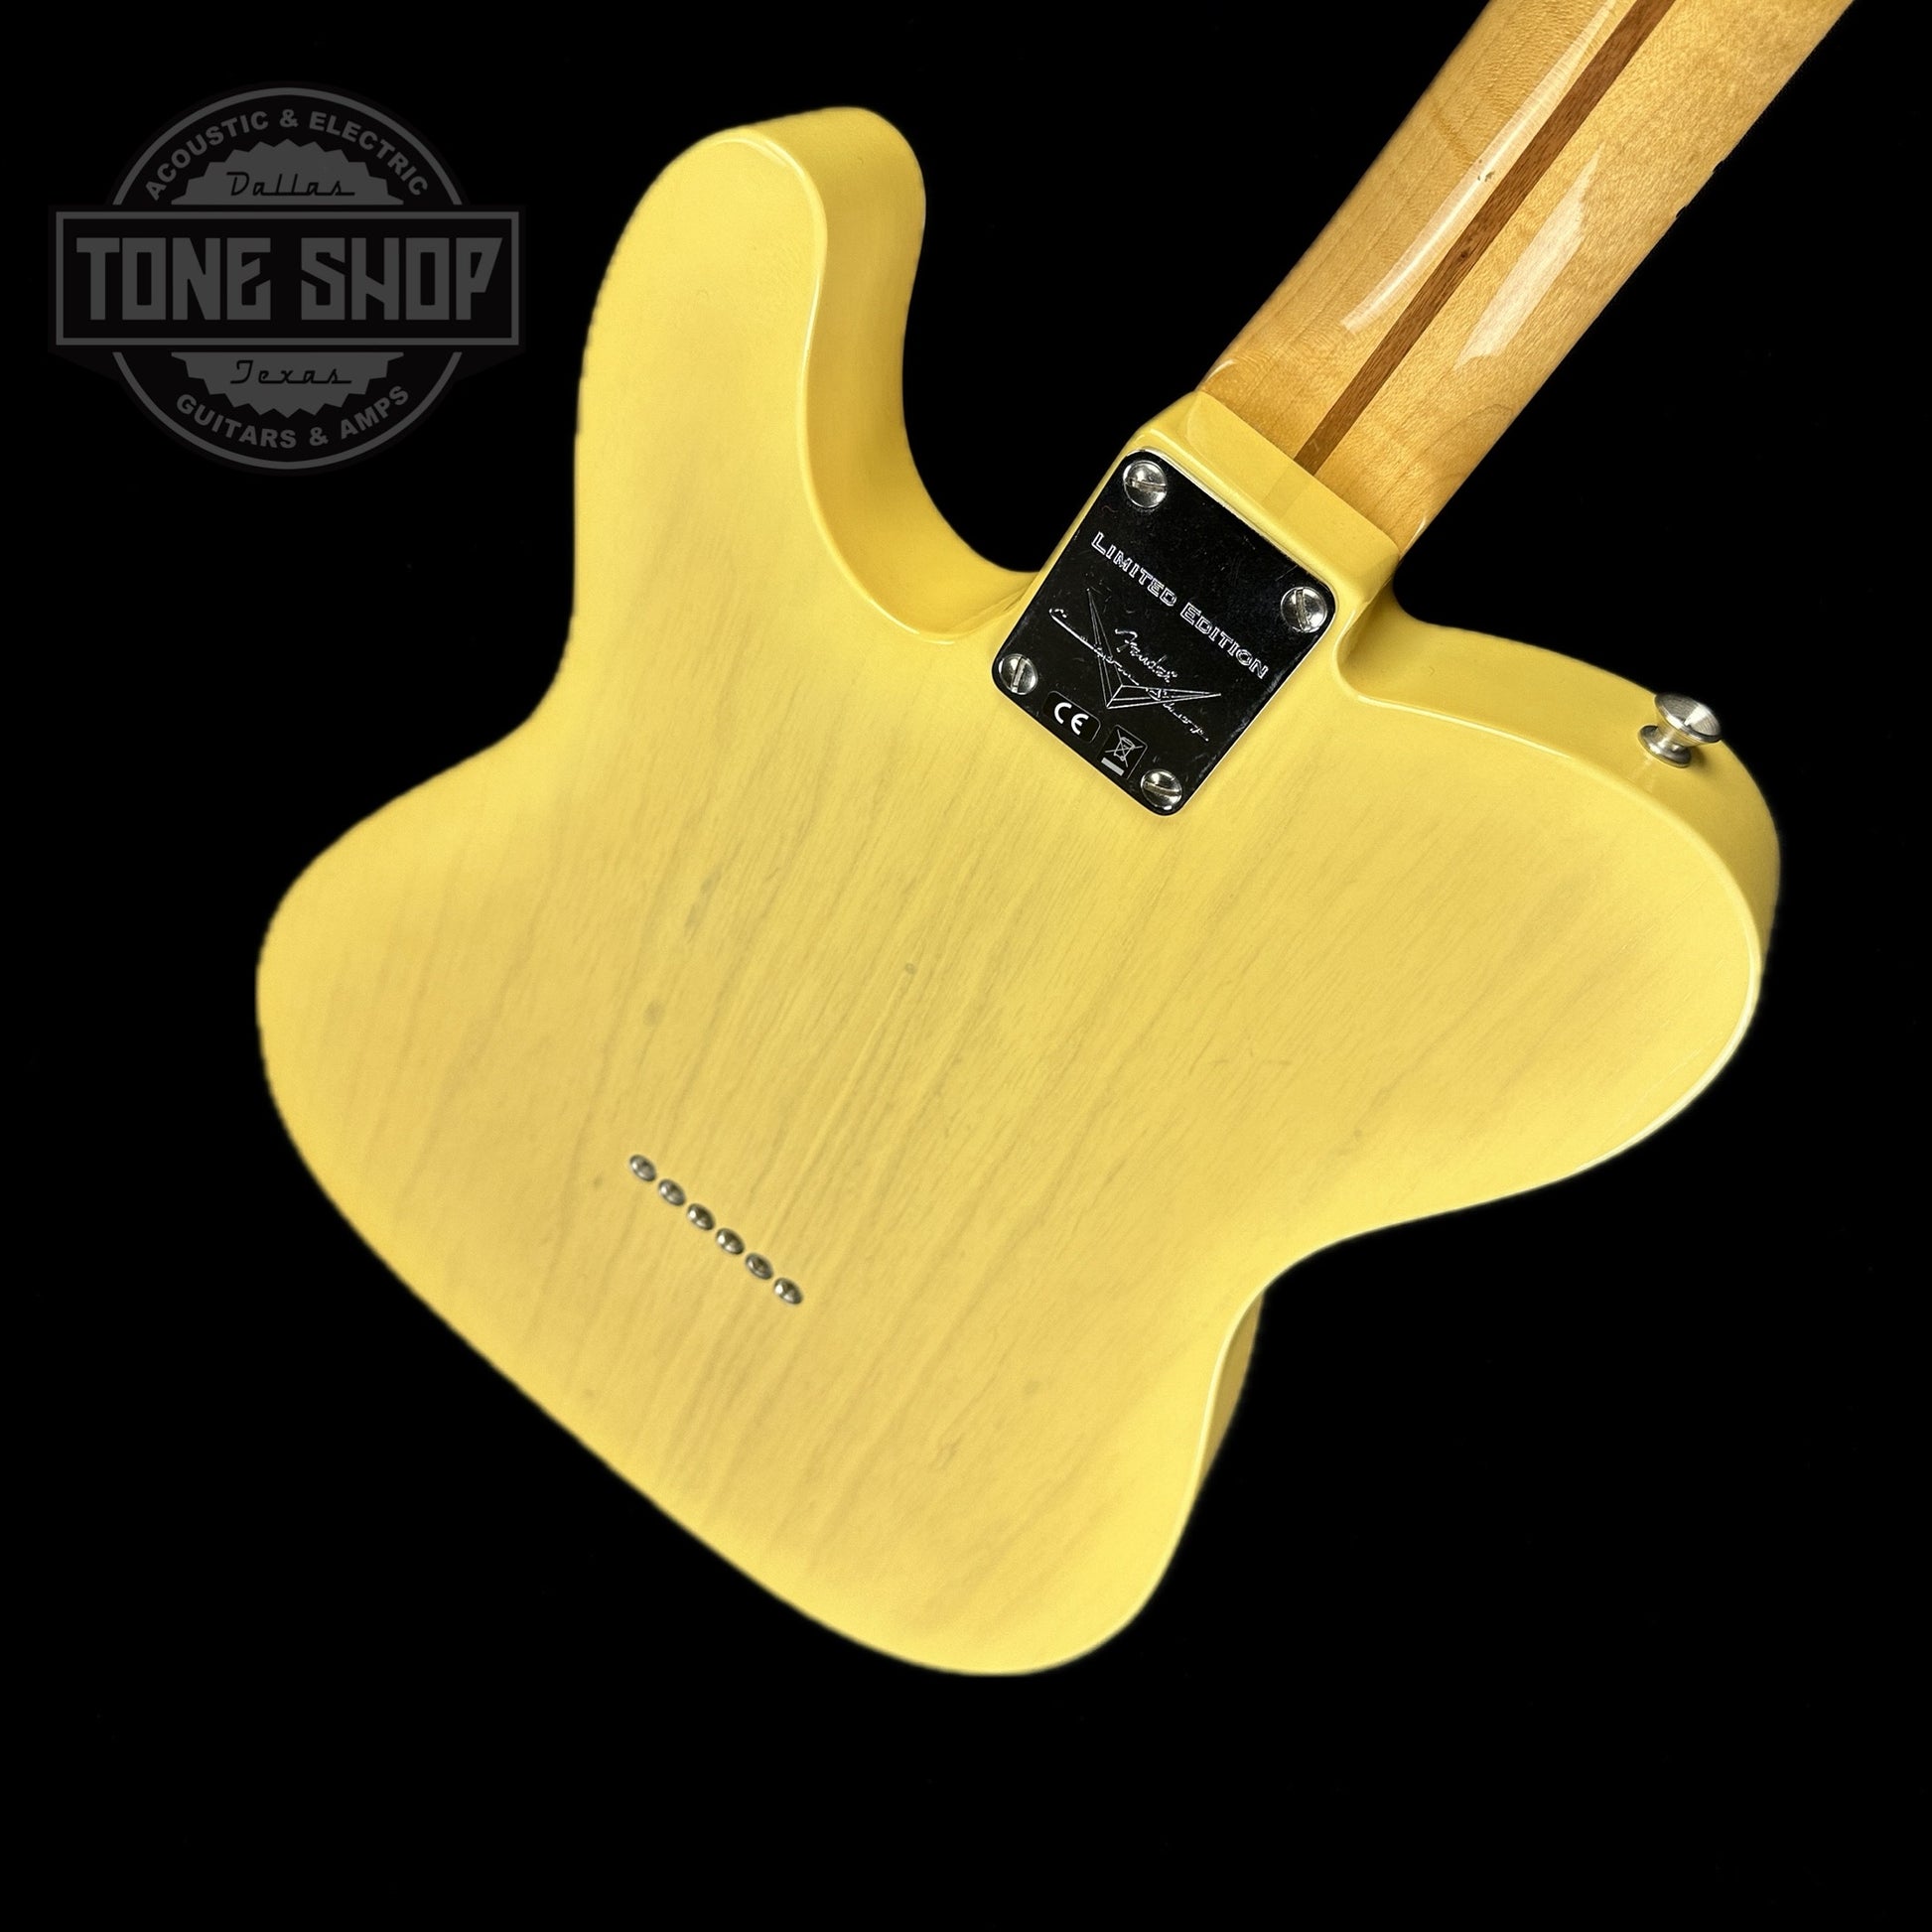 Back angle of Used 2021 Fender Custom Shop '51 Tele Deluxe Closet Classic Nocaster Blonde.